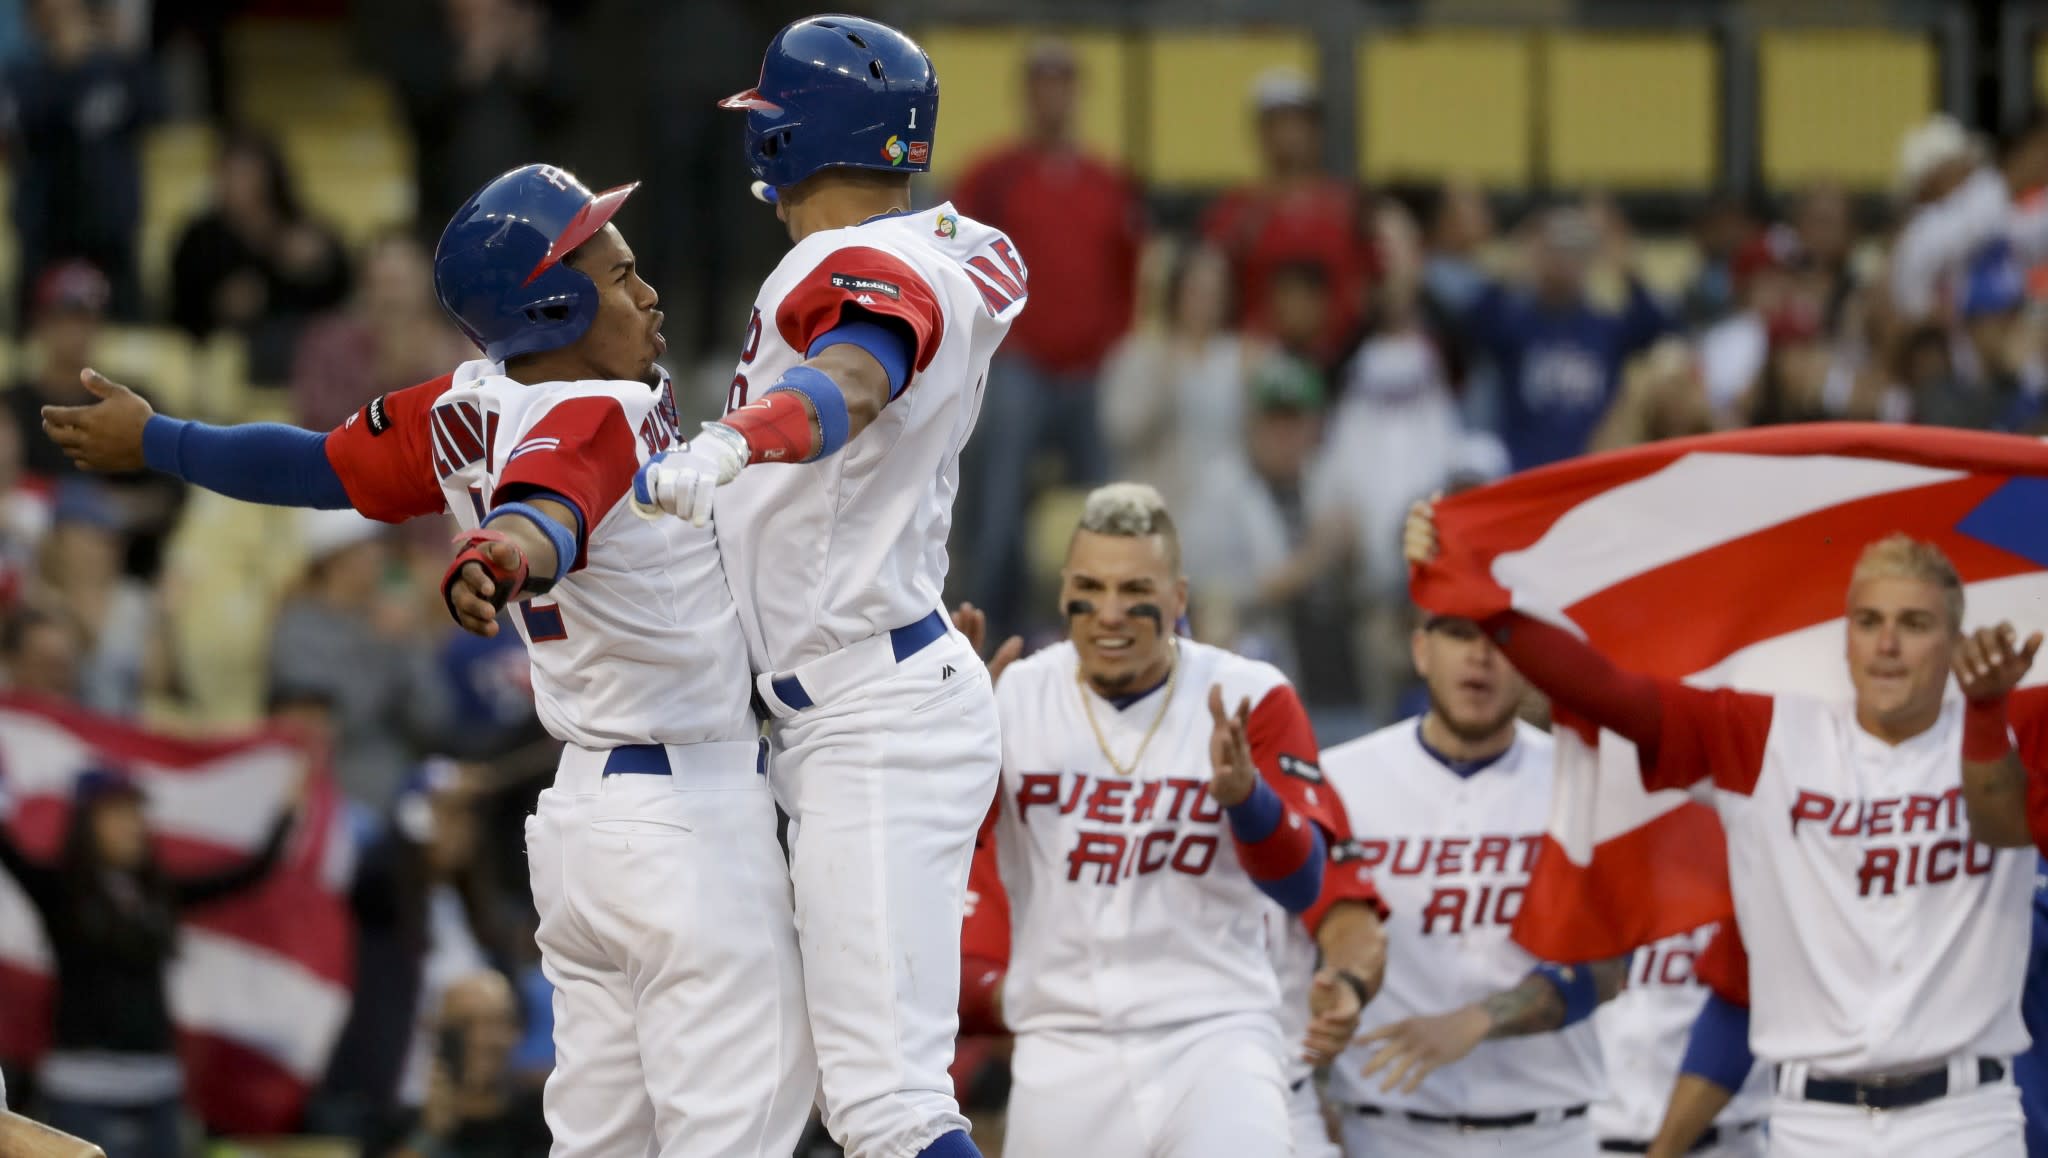 Puerto Rico advances to World Baseball Classic finals with walkoff win